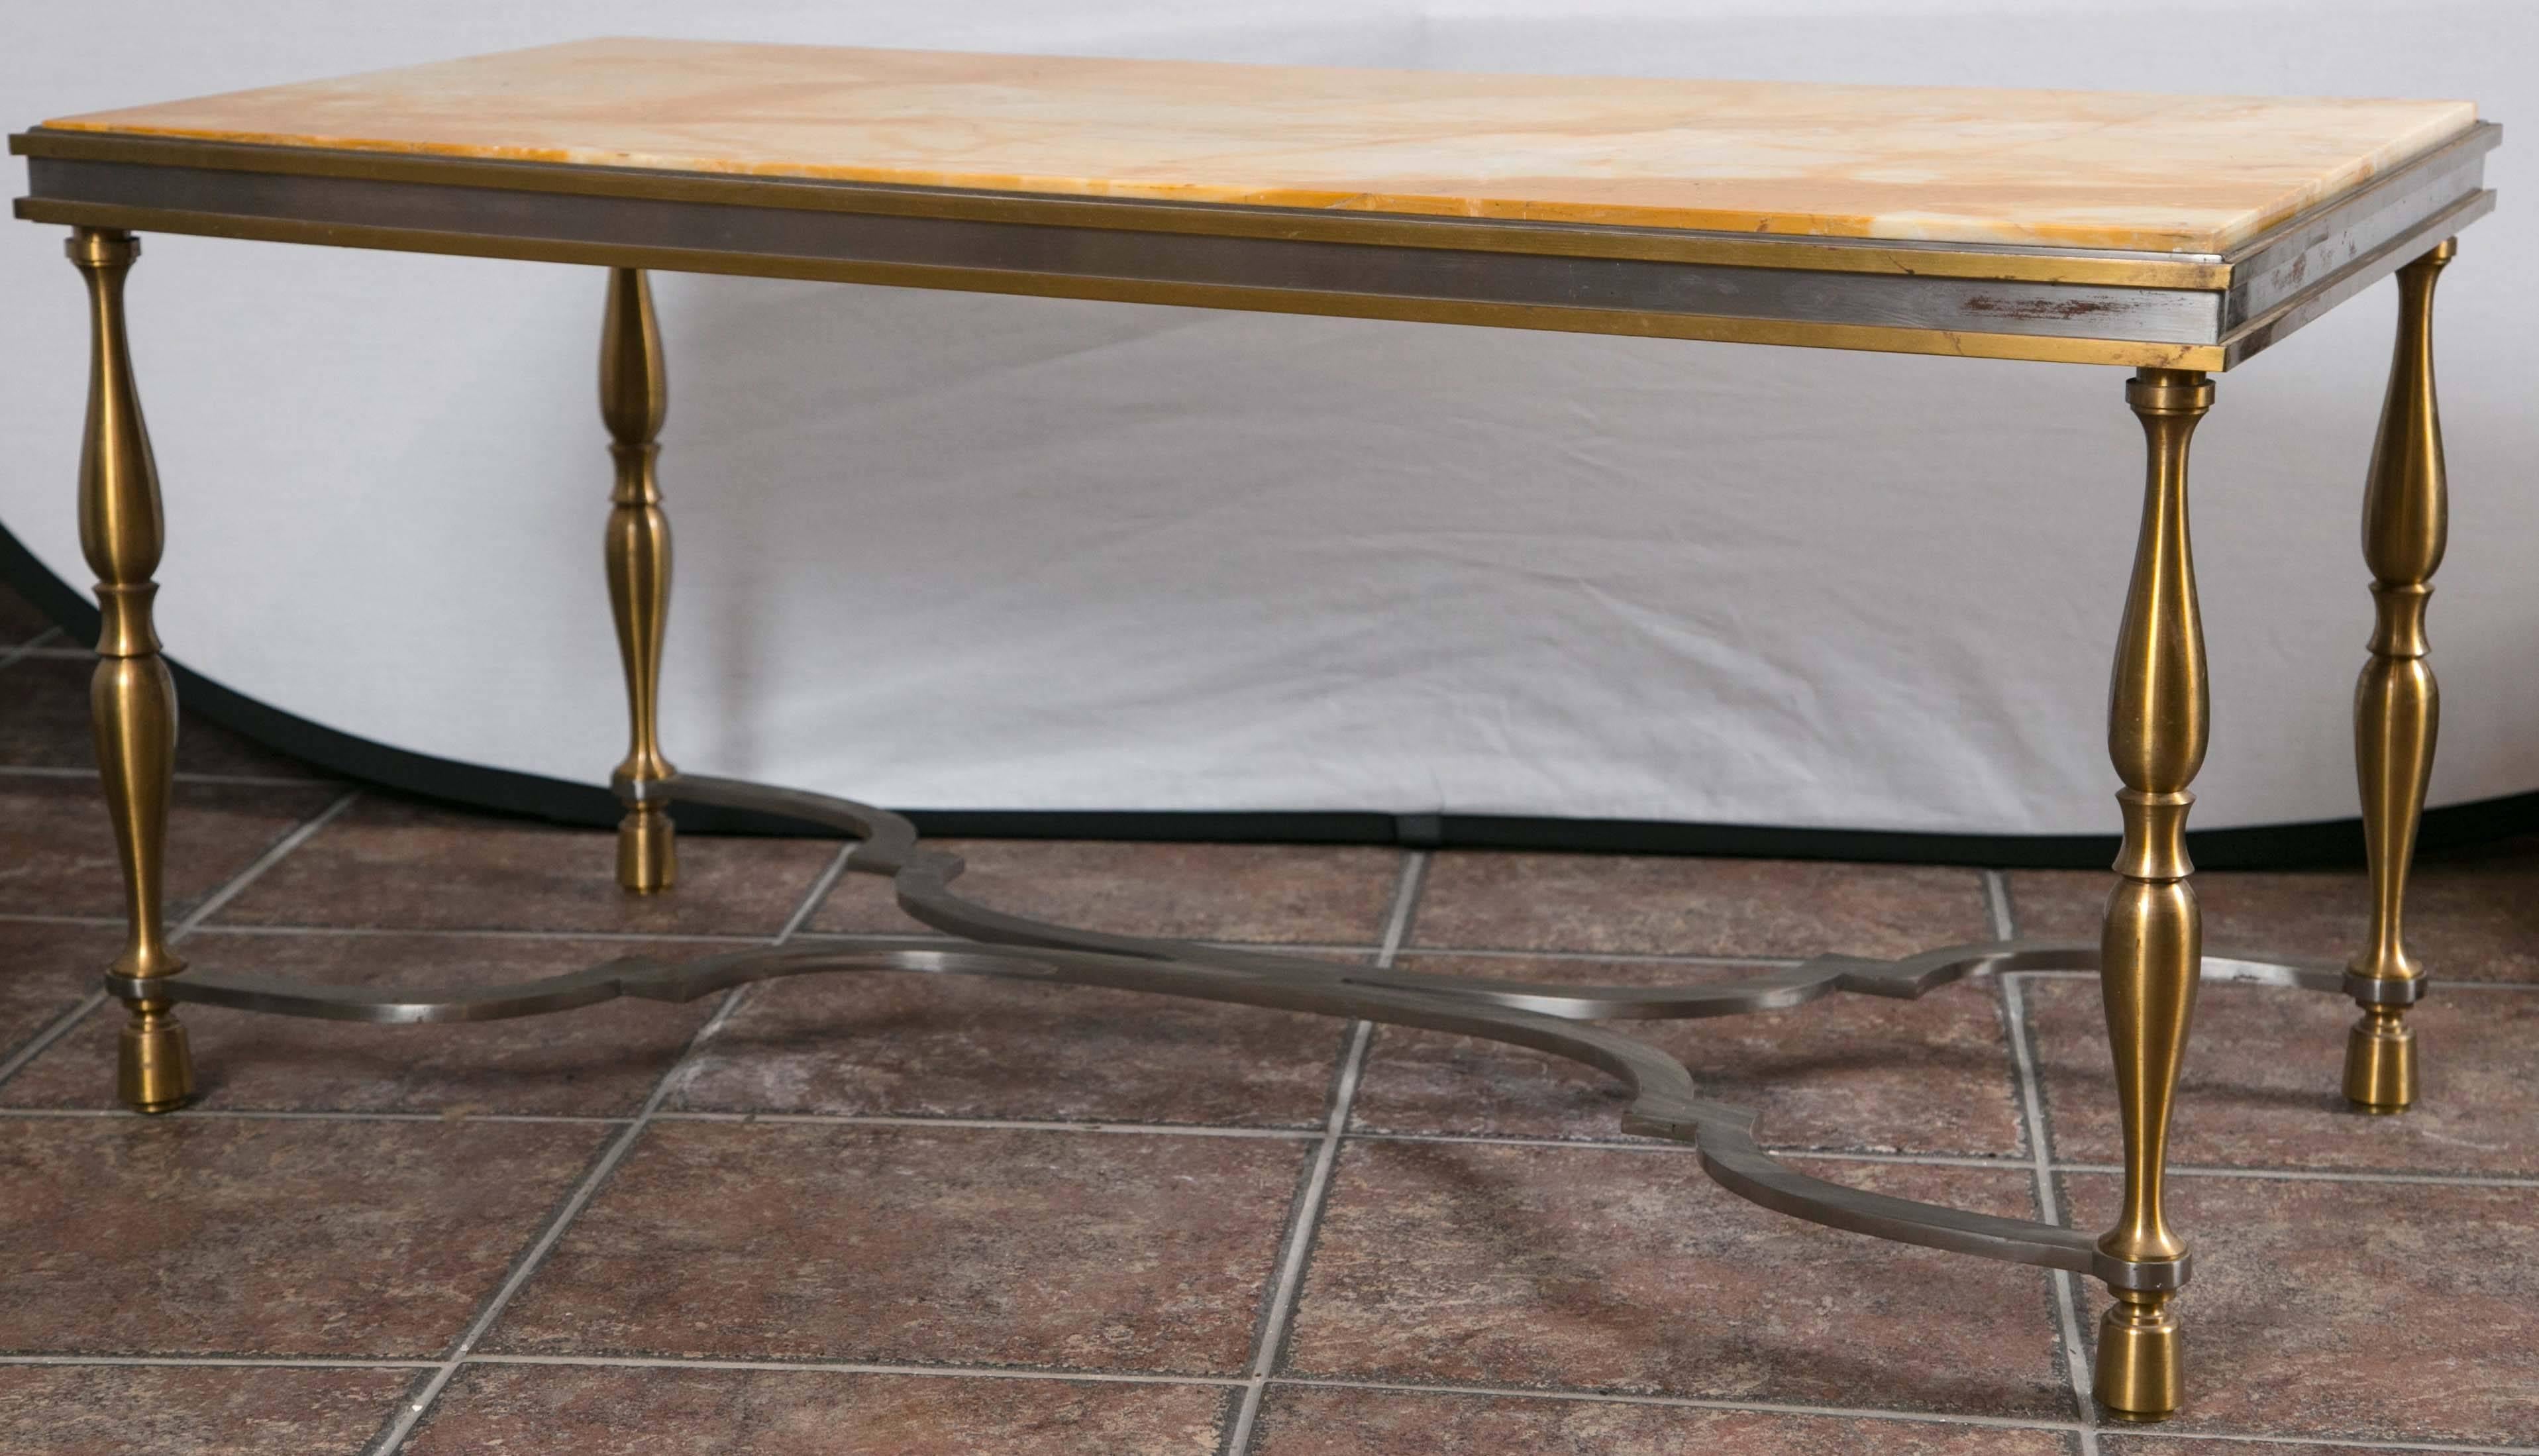 Sienna marble, bronze and steel table with shaped stretcher.